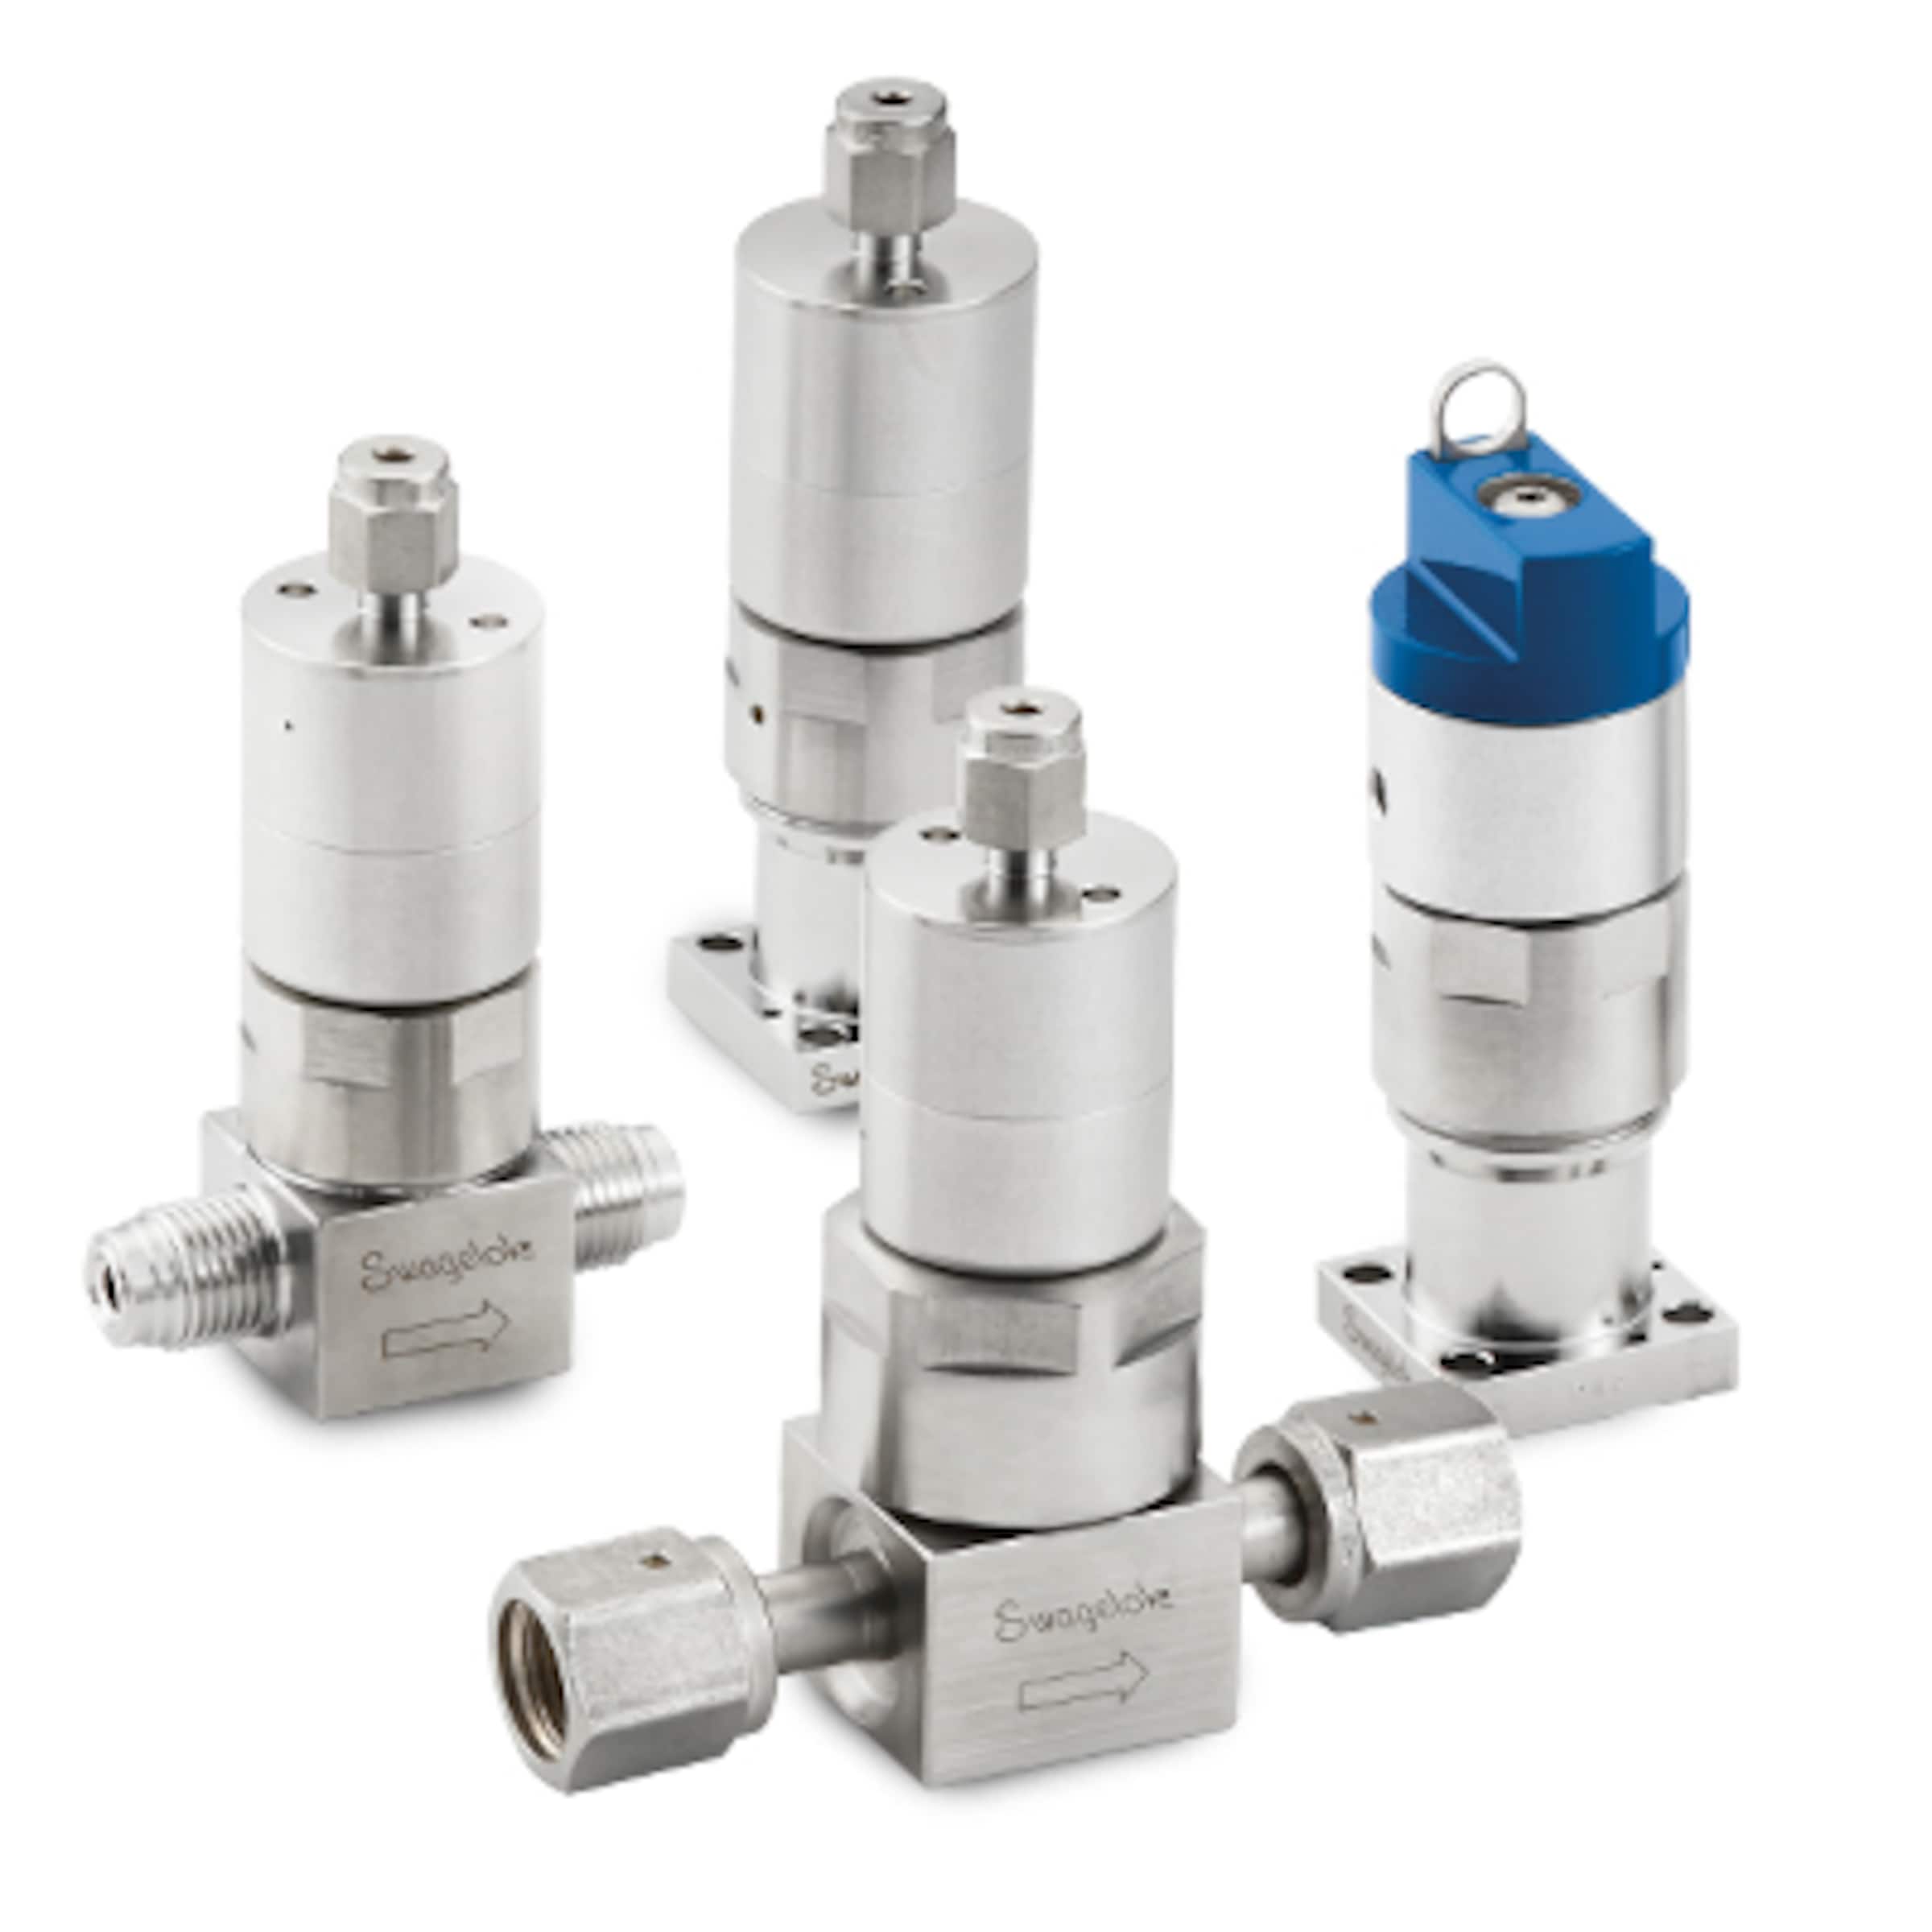 Thermal-Immersion Diaphragm Valves, DH Series